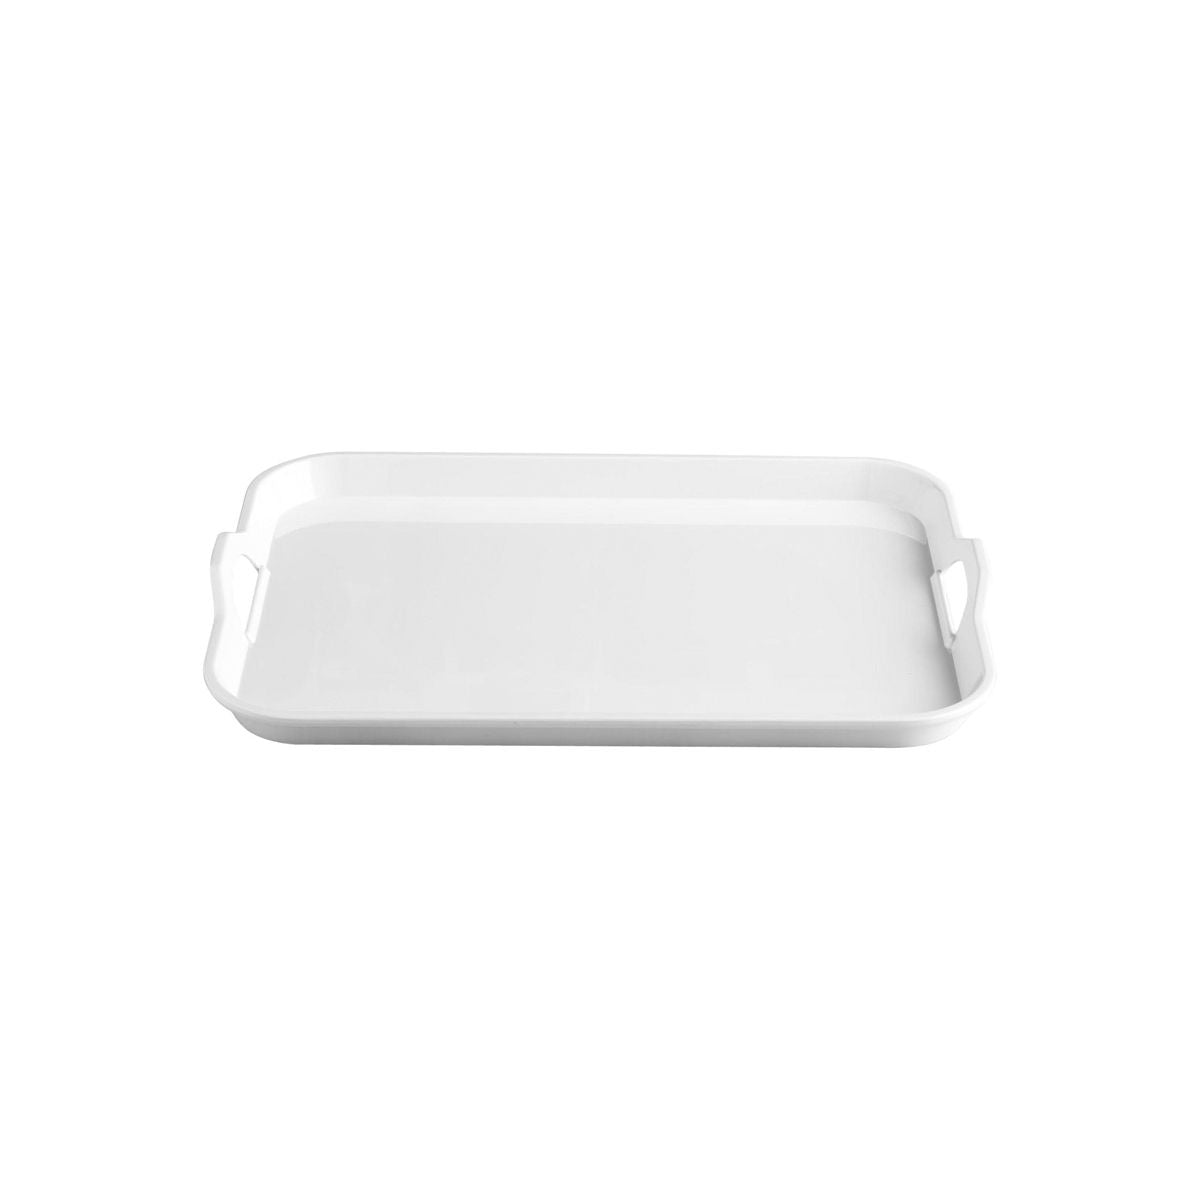 49311 Superware White Serving Tray with 2 Handles 440x320mm Tomkin Australia Hospitality Supplies